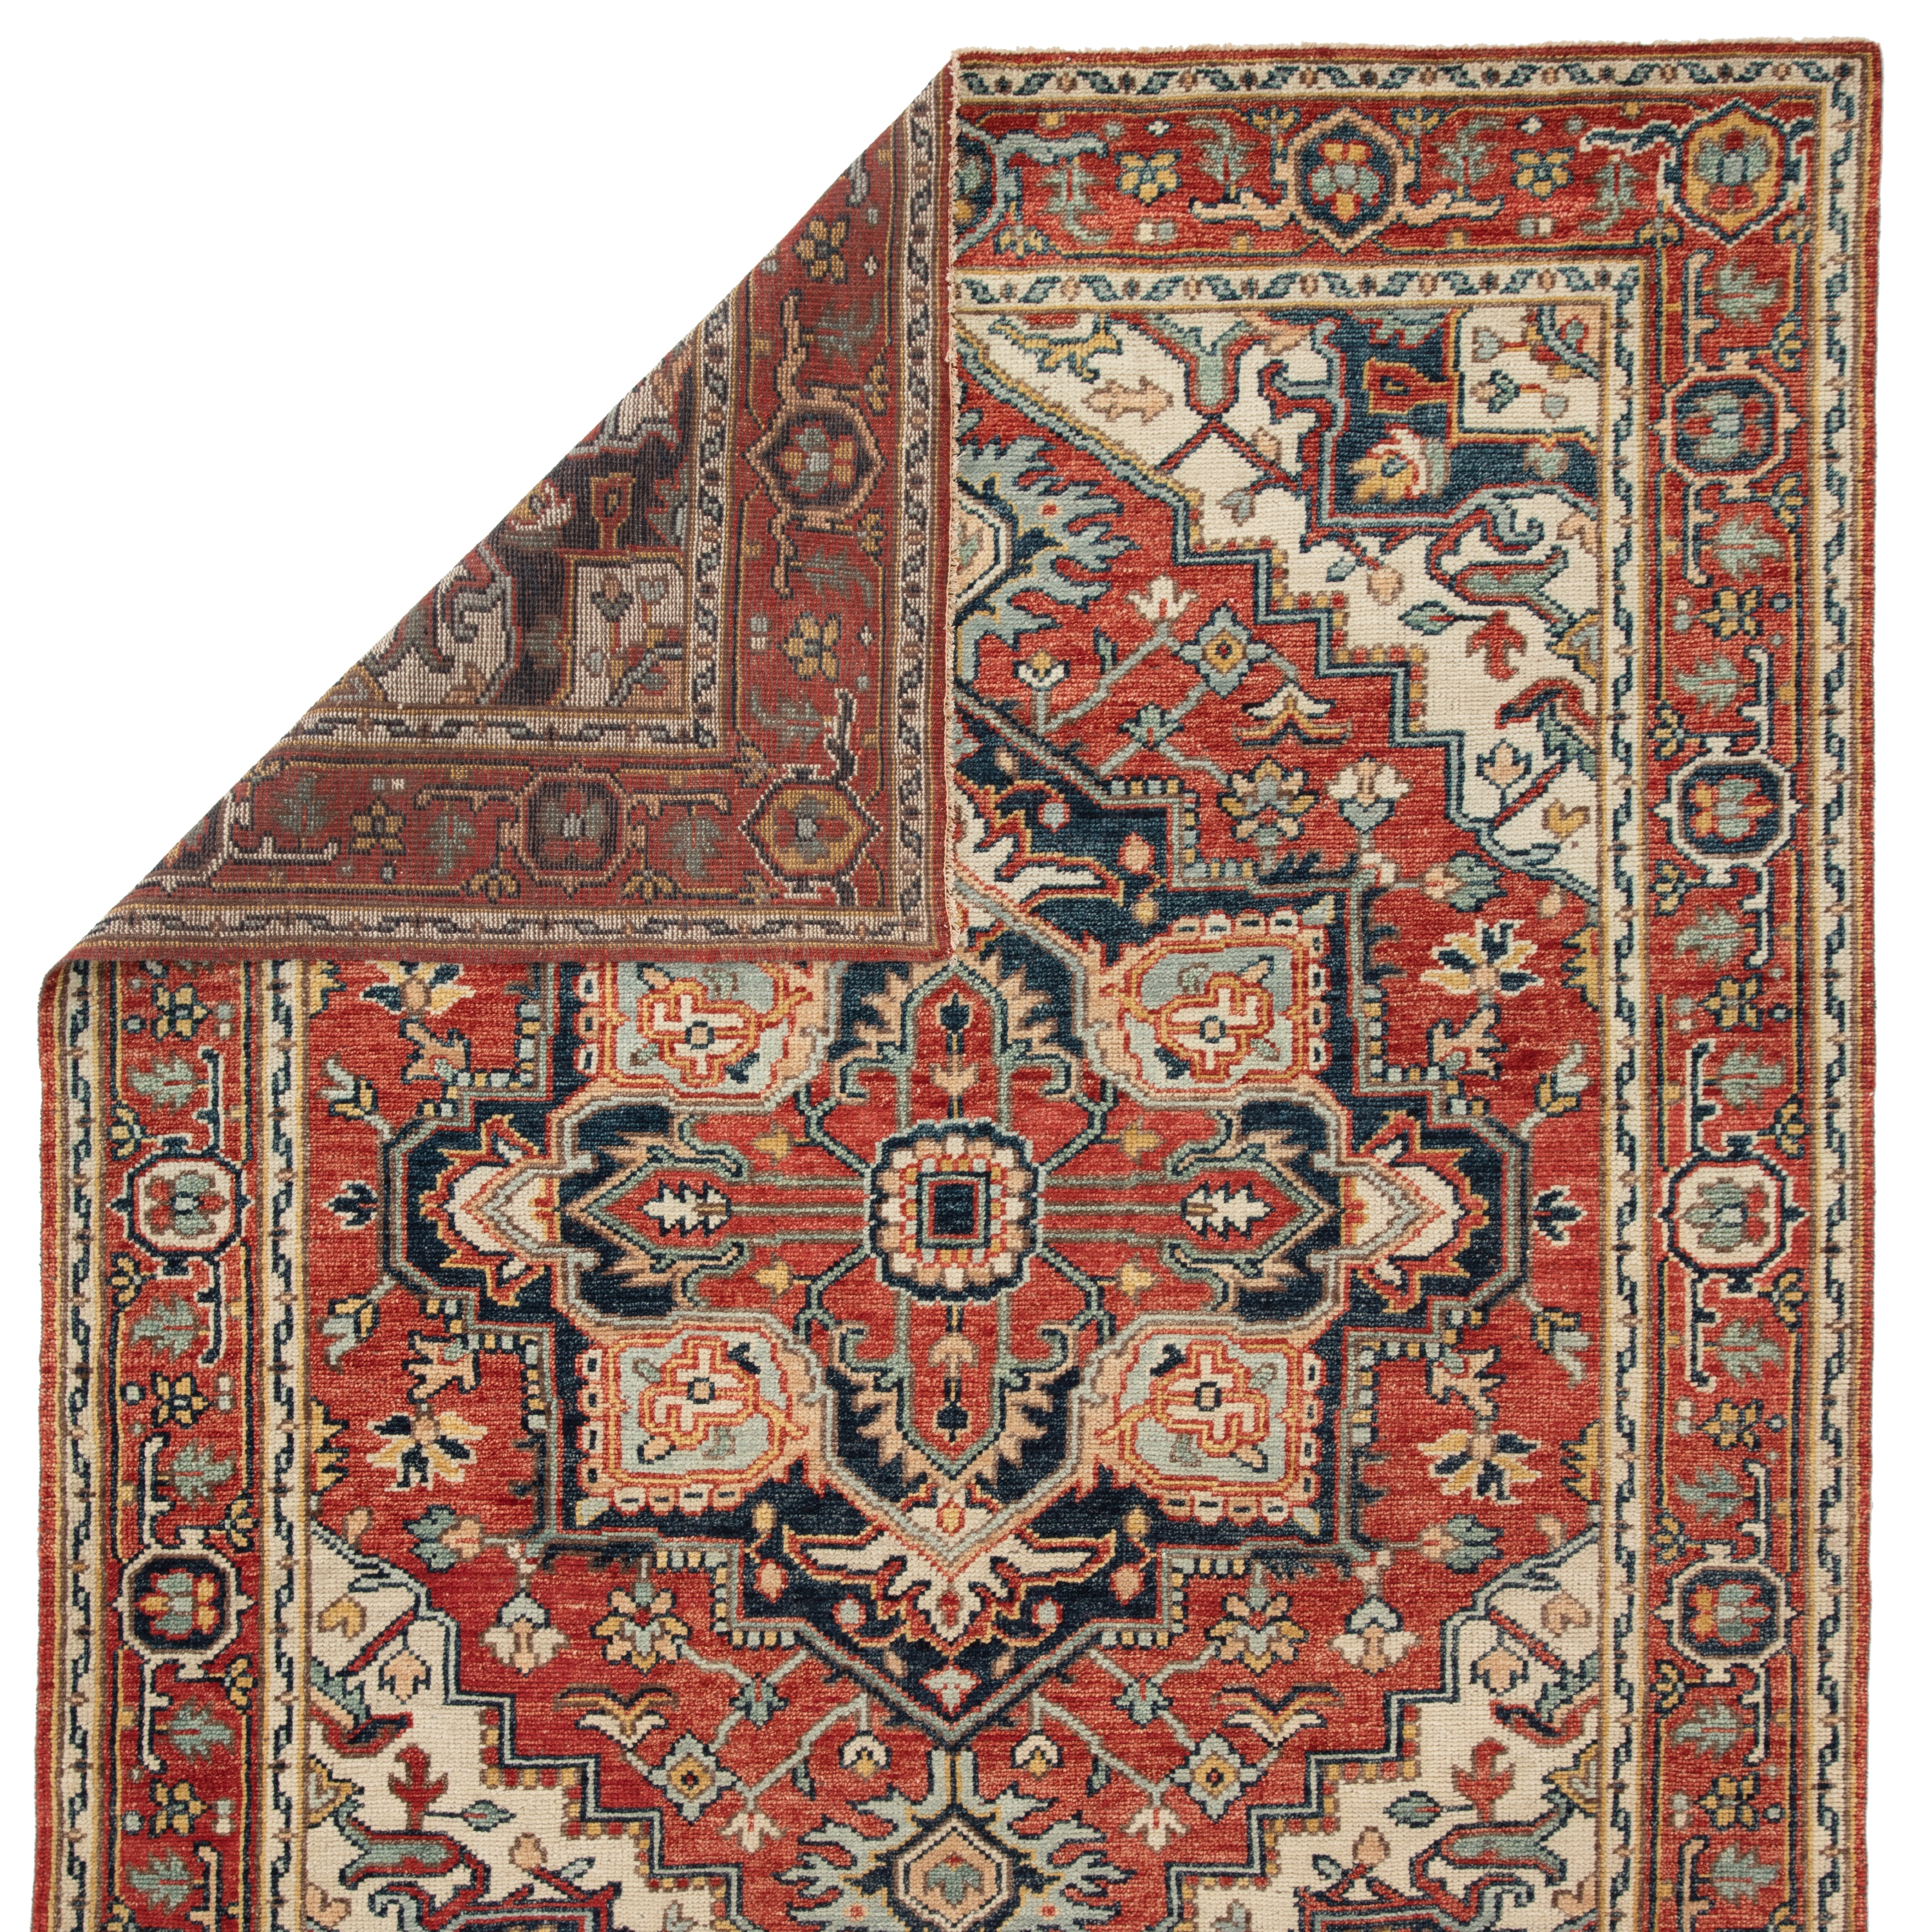 Willa Hand-Knotted Medallion Red/ Multicolor Area Rug (6'X9') - Image 2